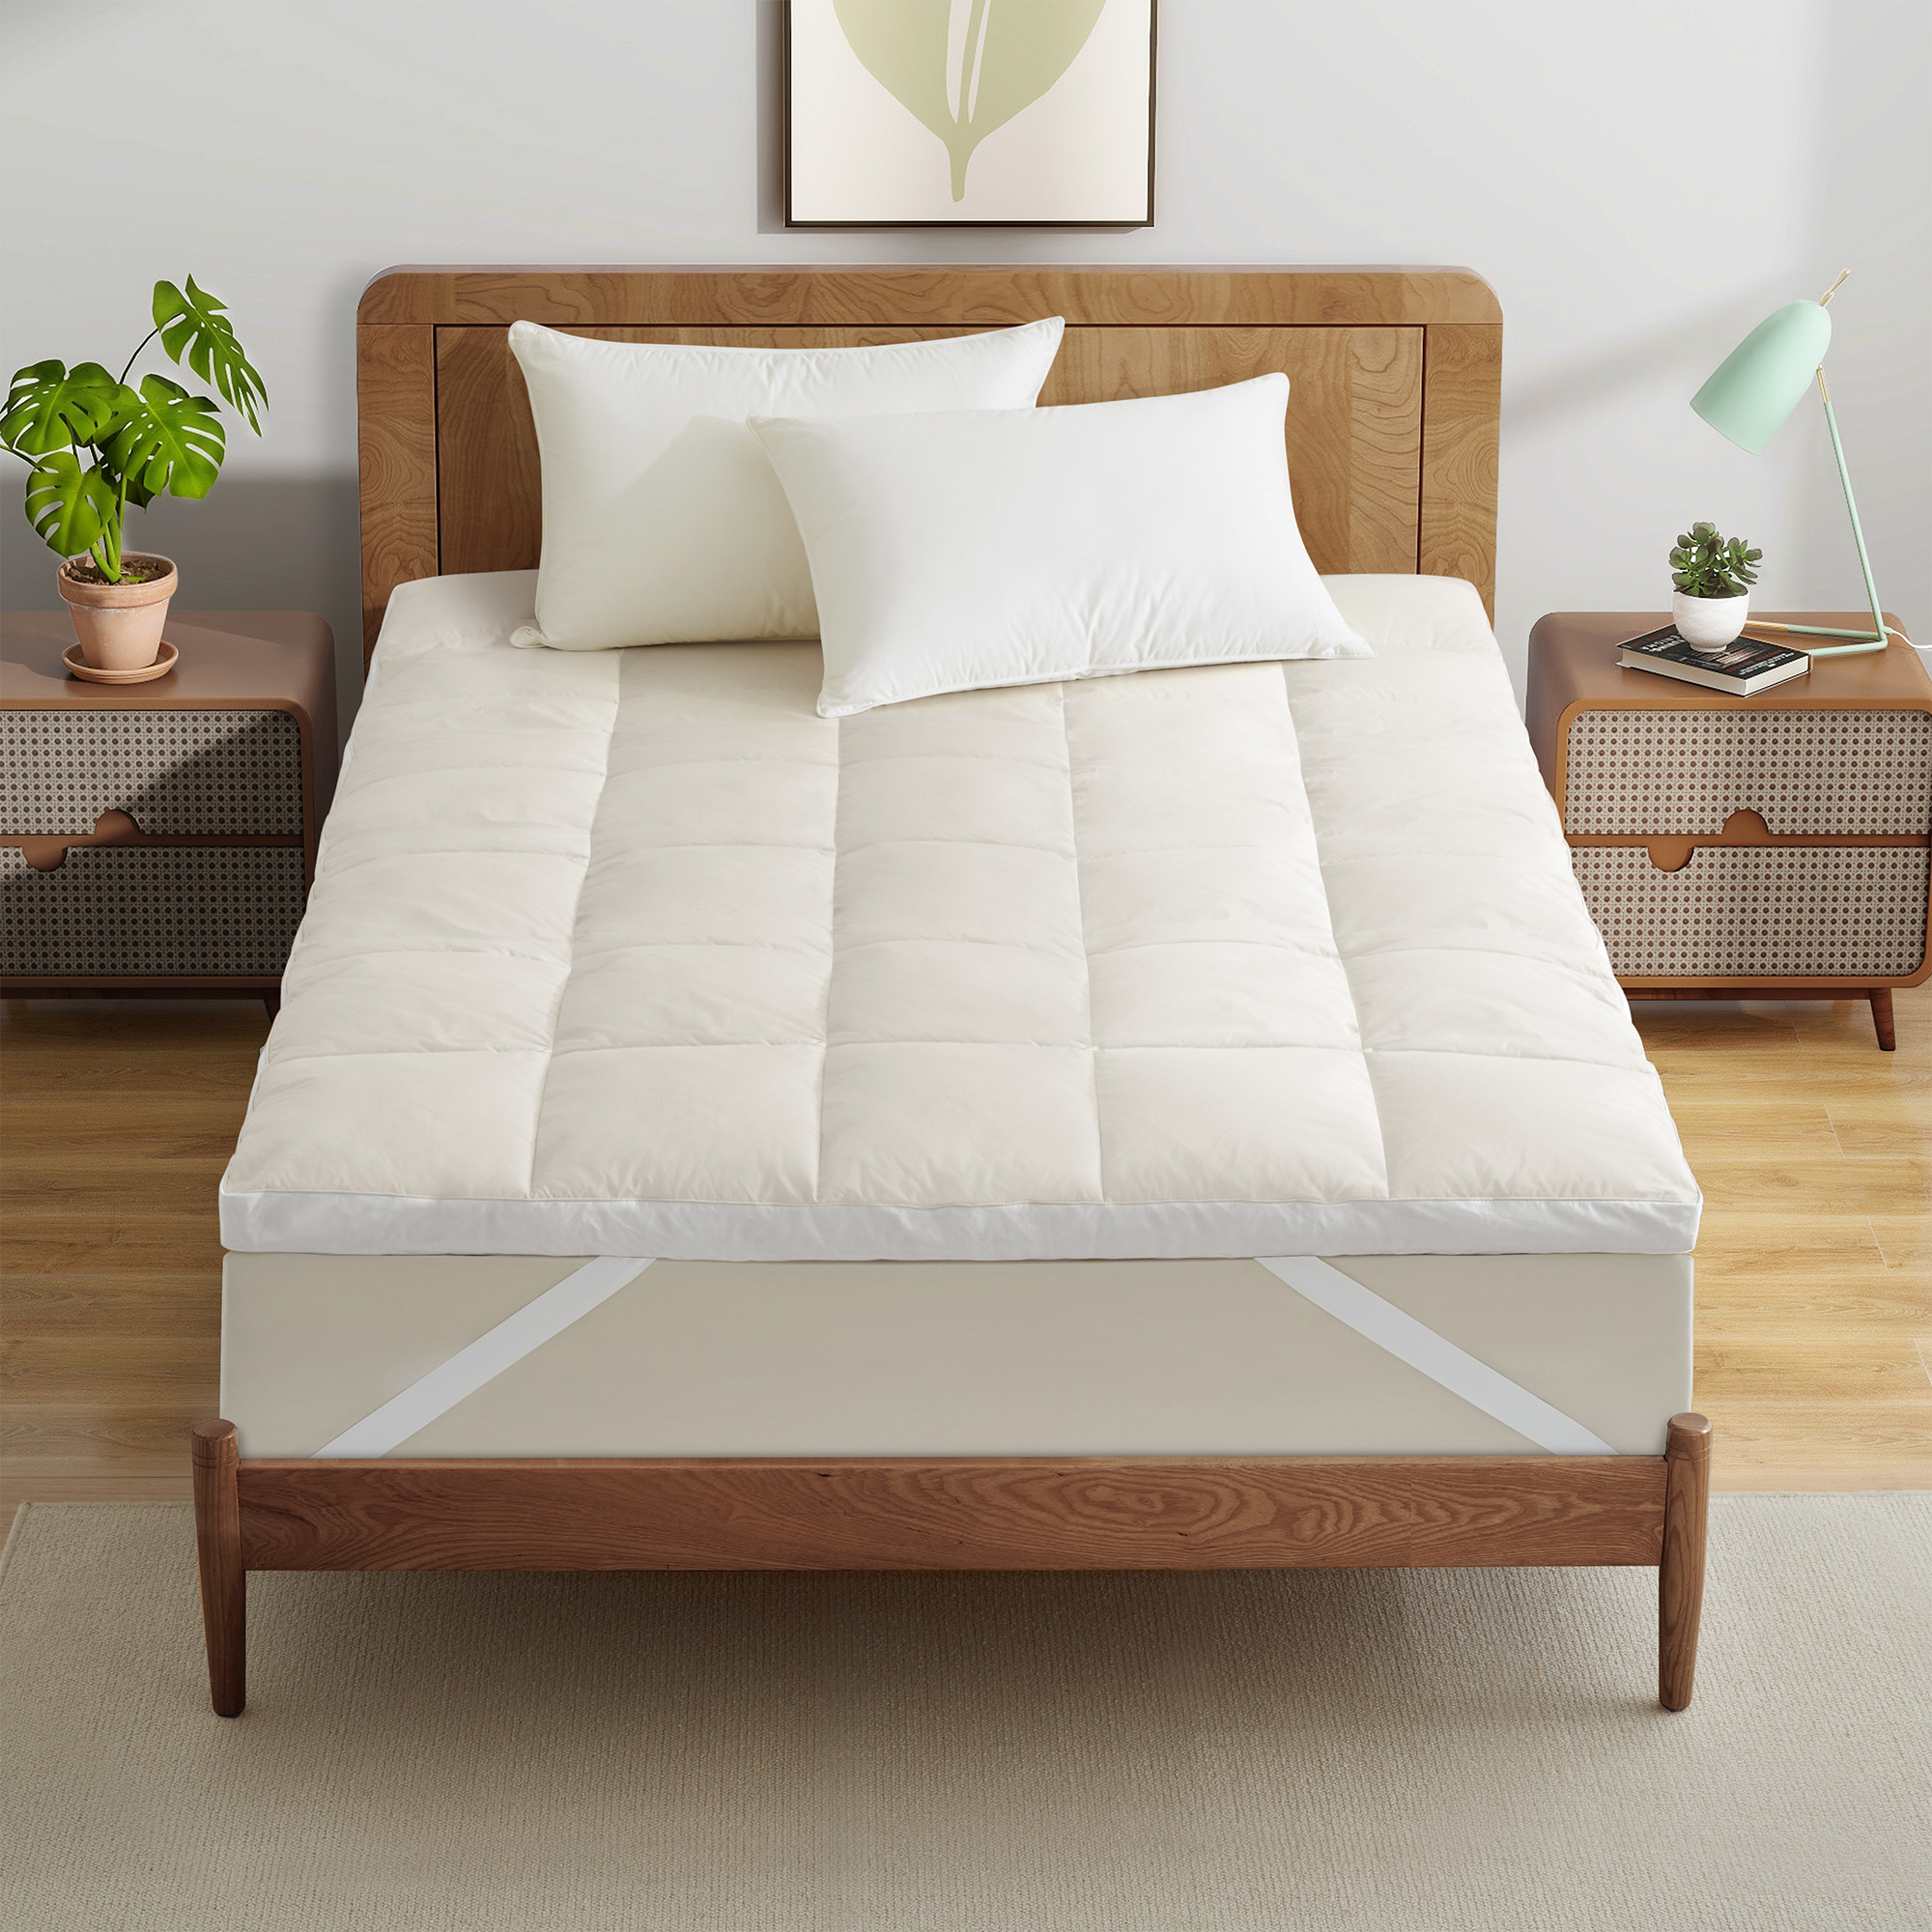 Organic Cotton Mattress Topper Feather Bed - King